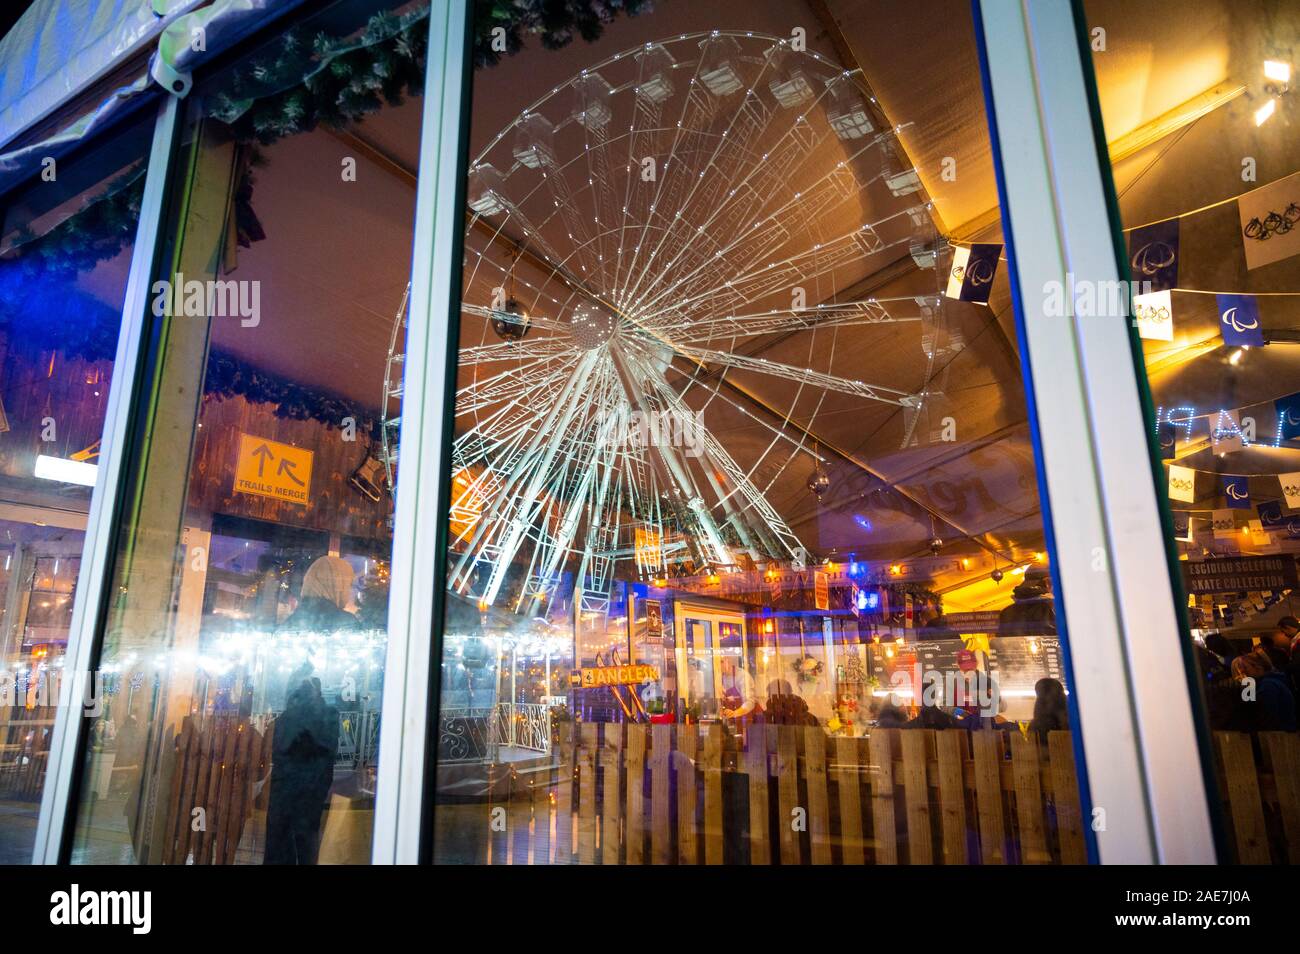 A Cold December night in Cardiff in the lead up to Christmas. Colourful reflections in a window at The Winter Wonderland. Stock Photo